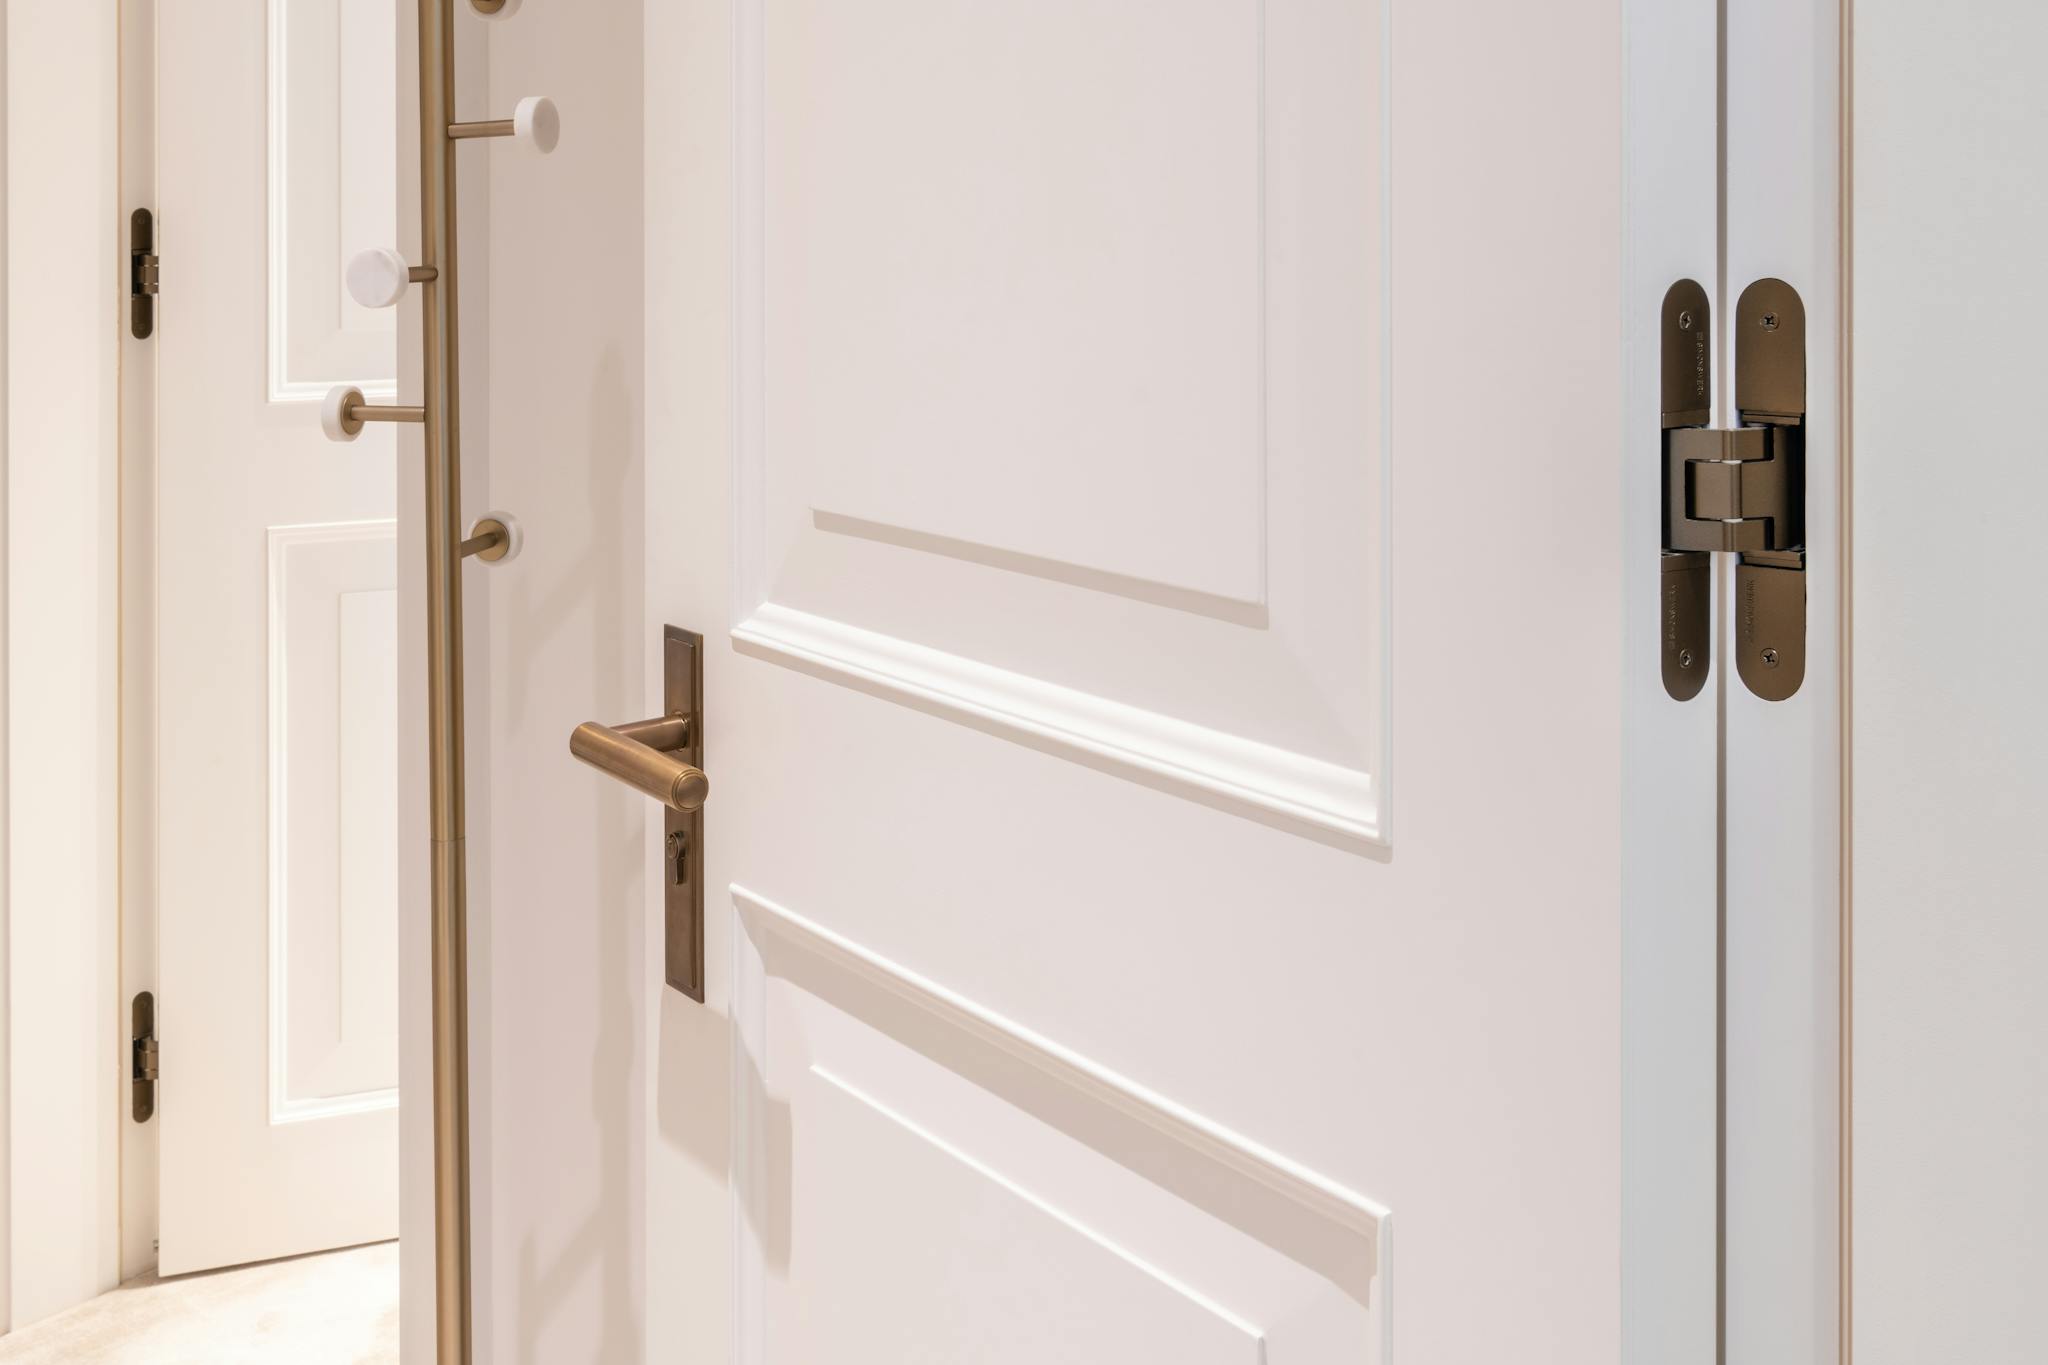 A fully open flush door showing the hinge and brass Joseph Giles hardware.